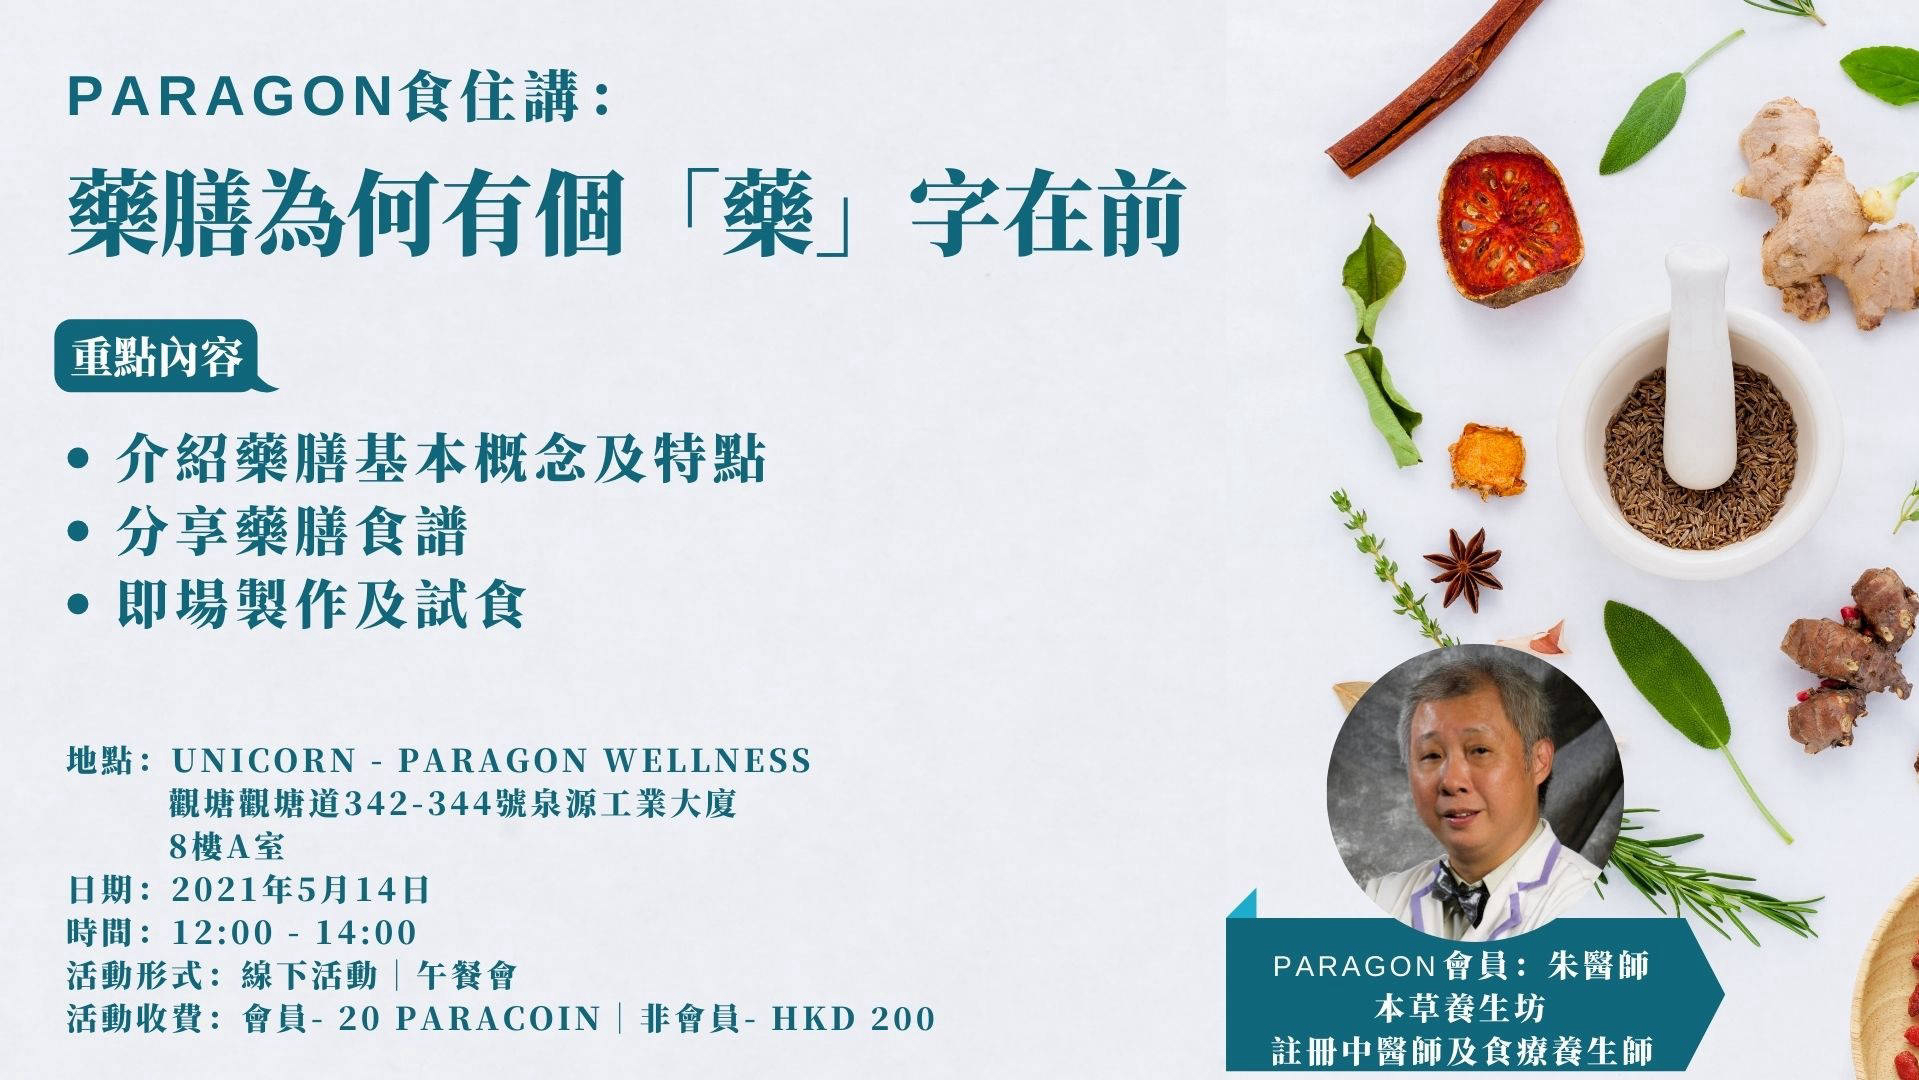 Paragon x Healthy Herbal event